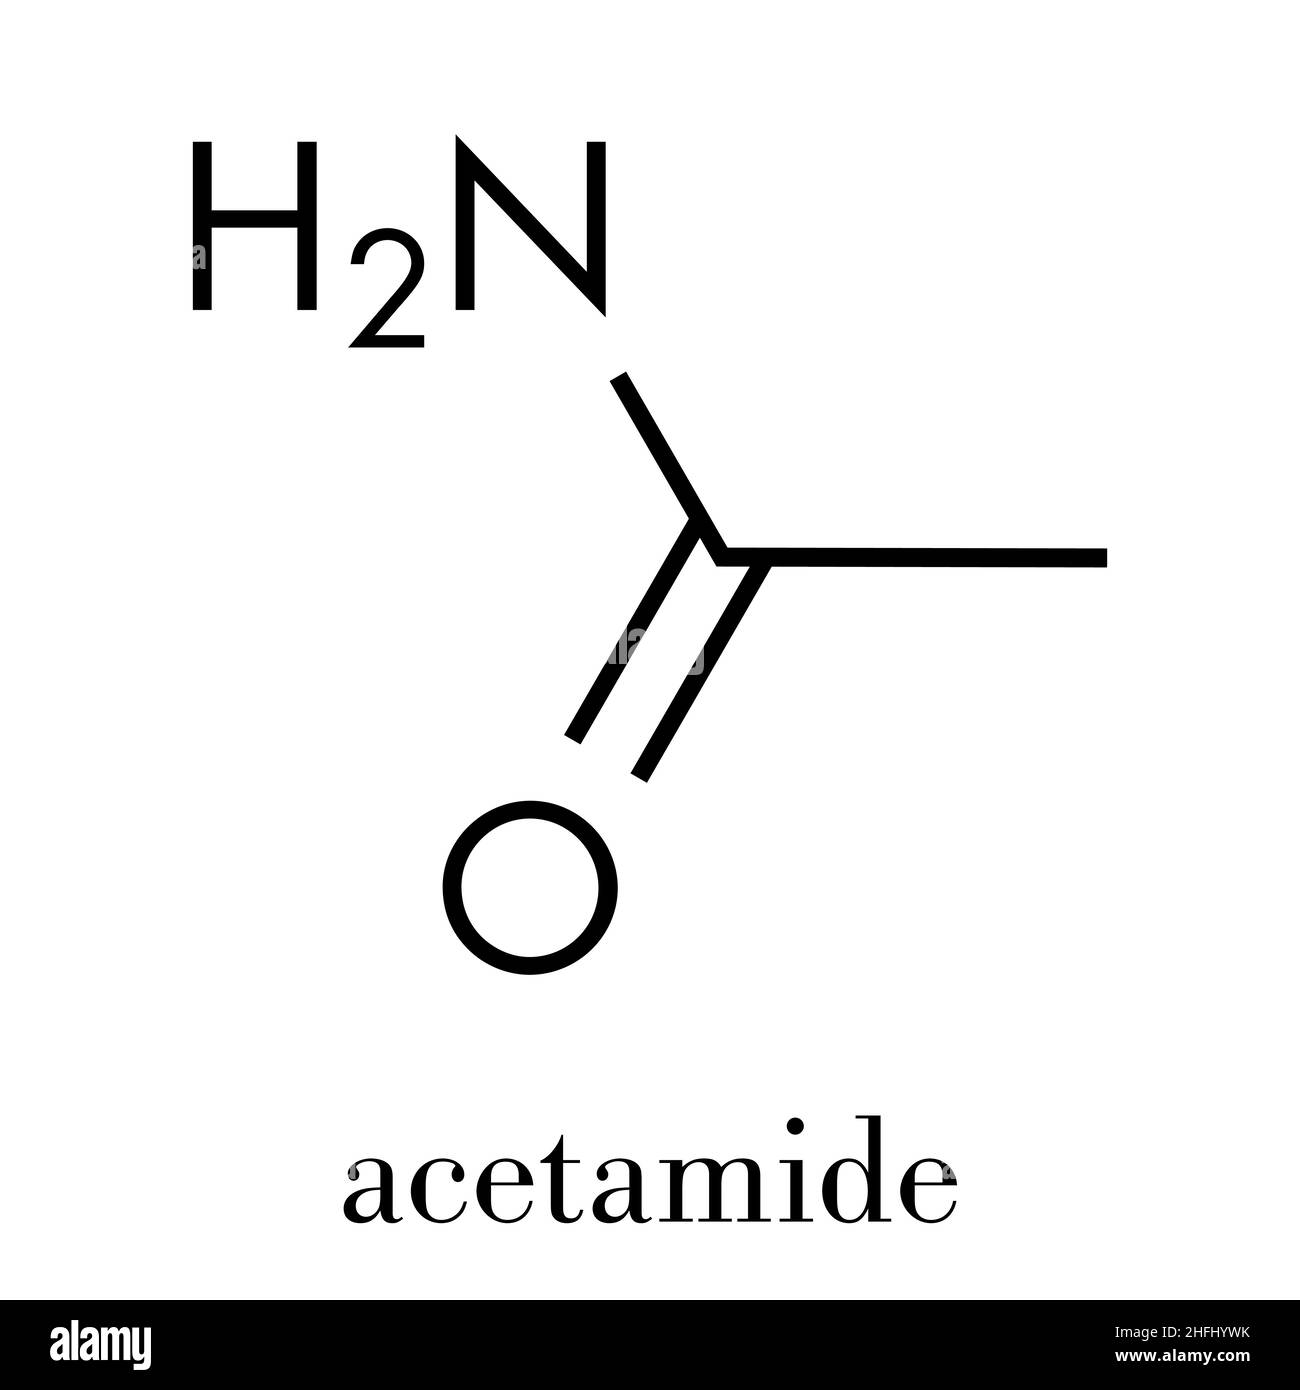 Acetamide (ethanamide) molecule. Used as plasticizer and industrial solvent. Carcinogenic (known to cause cancer). Skeletal formula. Stock Vector